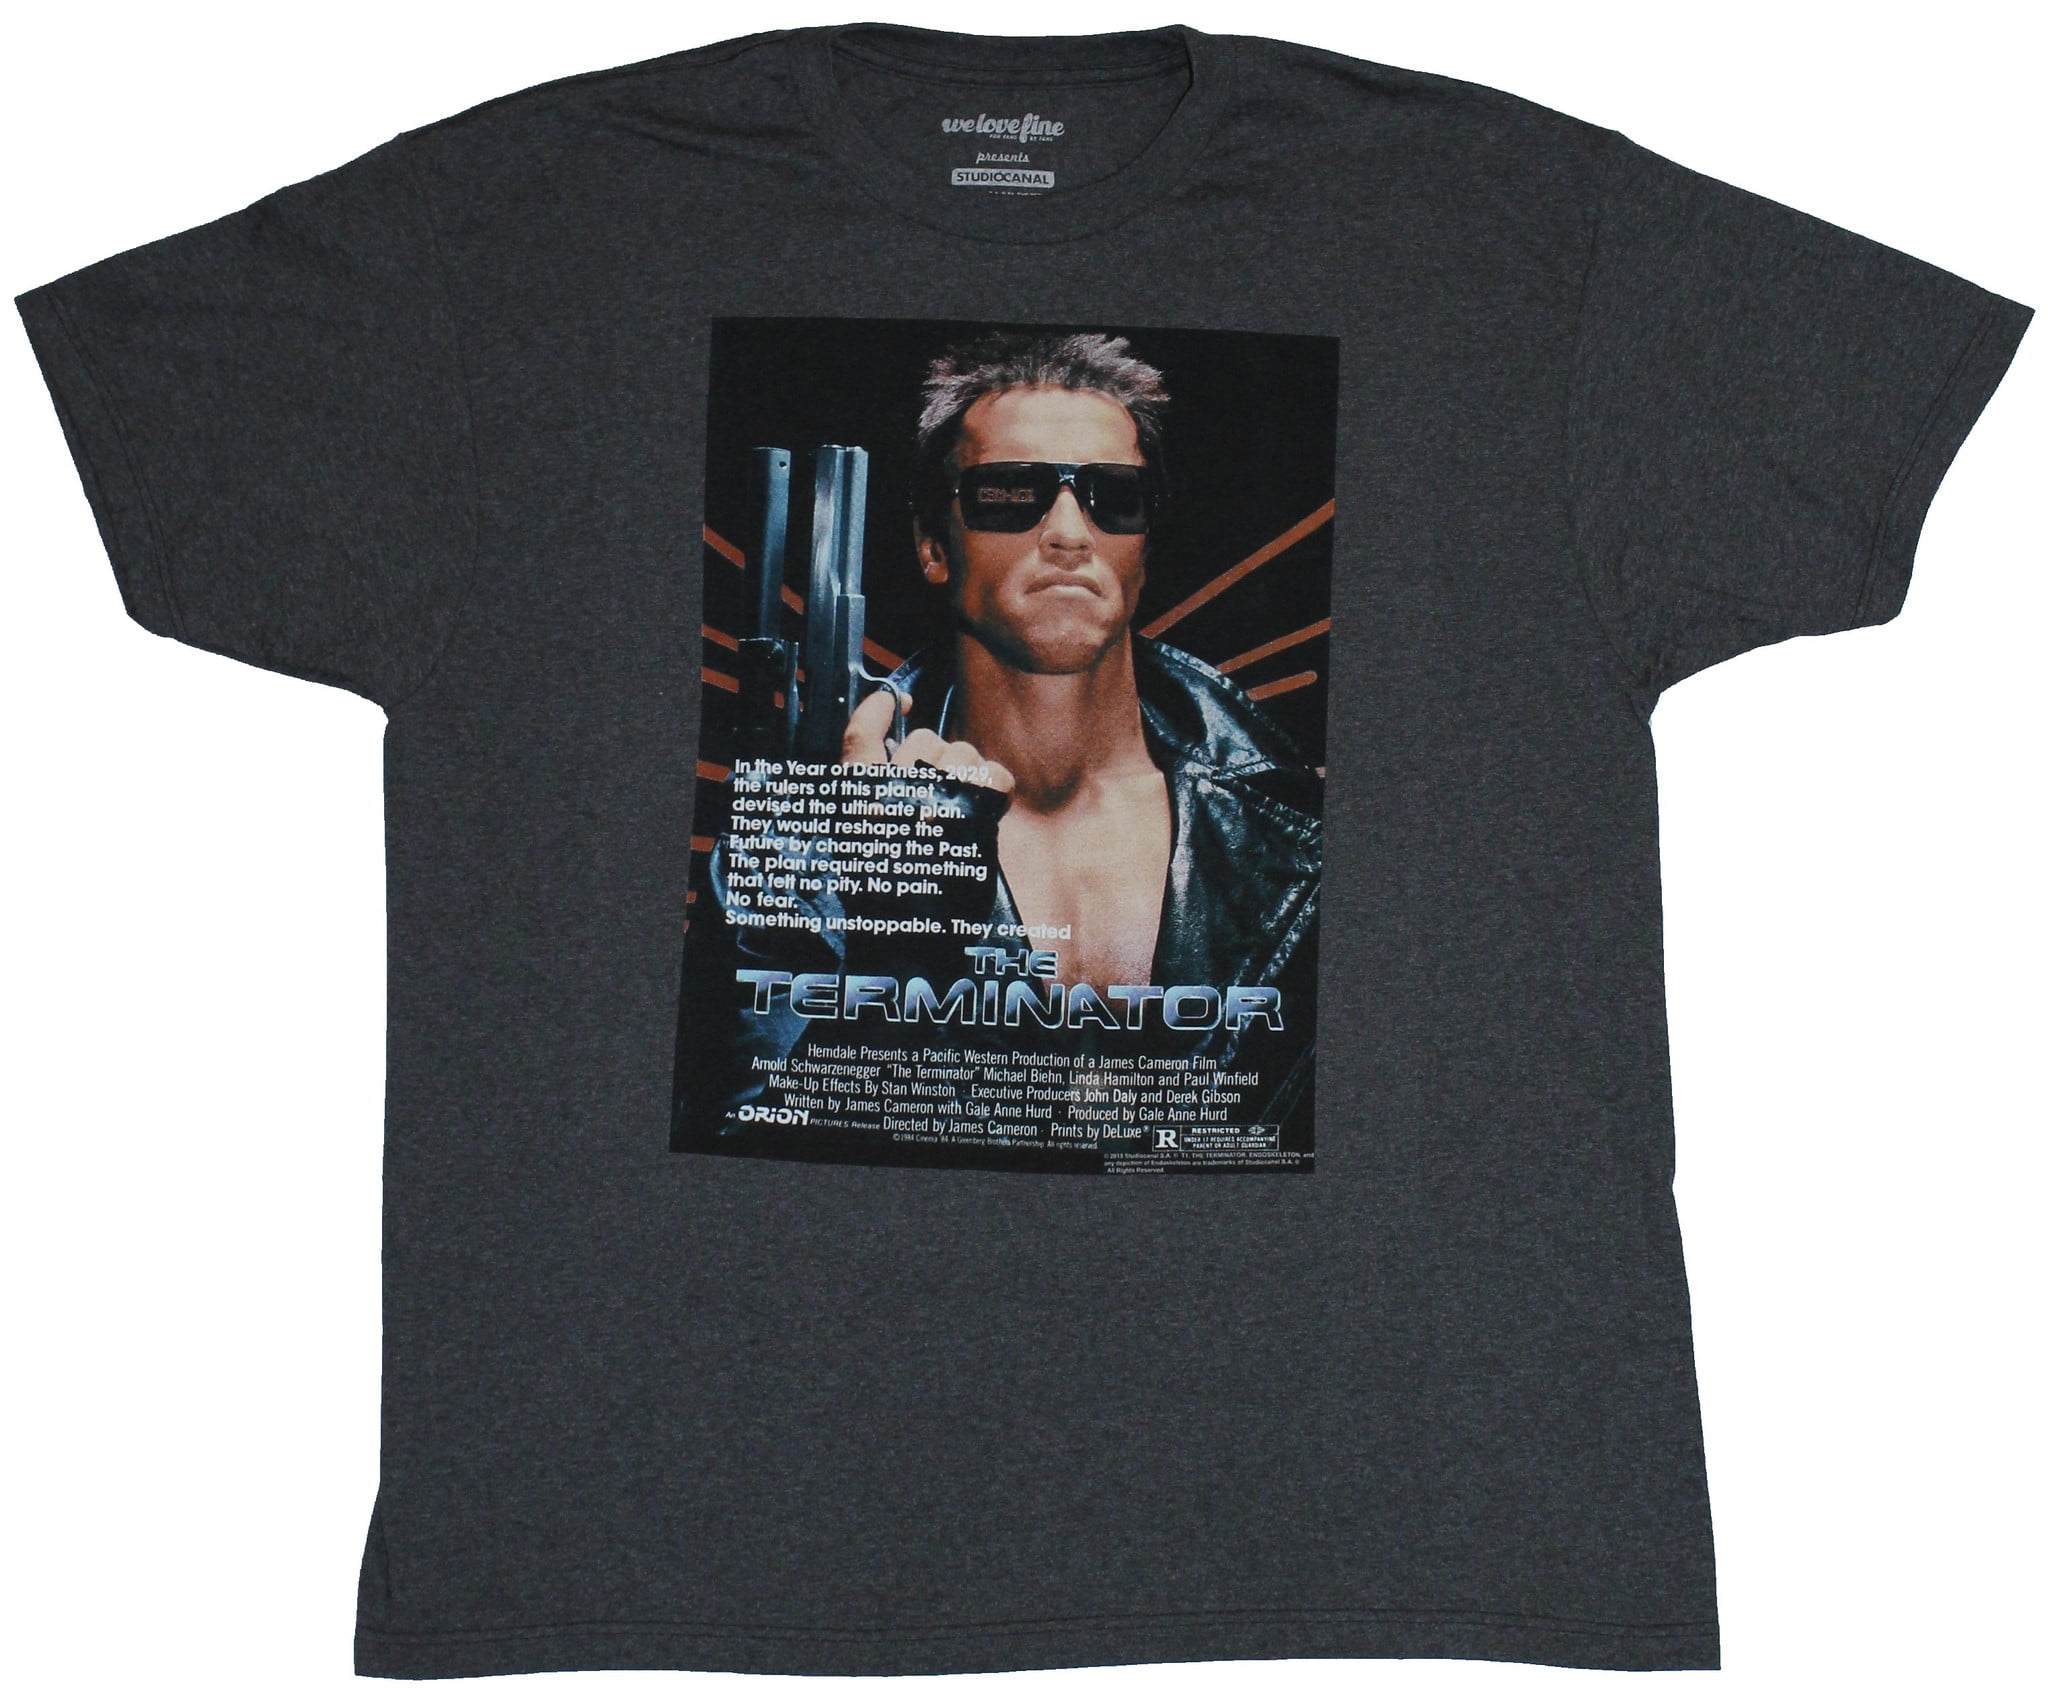 The Terminator Funny Shirt Men's and Women's Sizes High Quality Graphic Tee